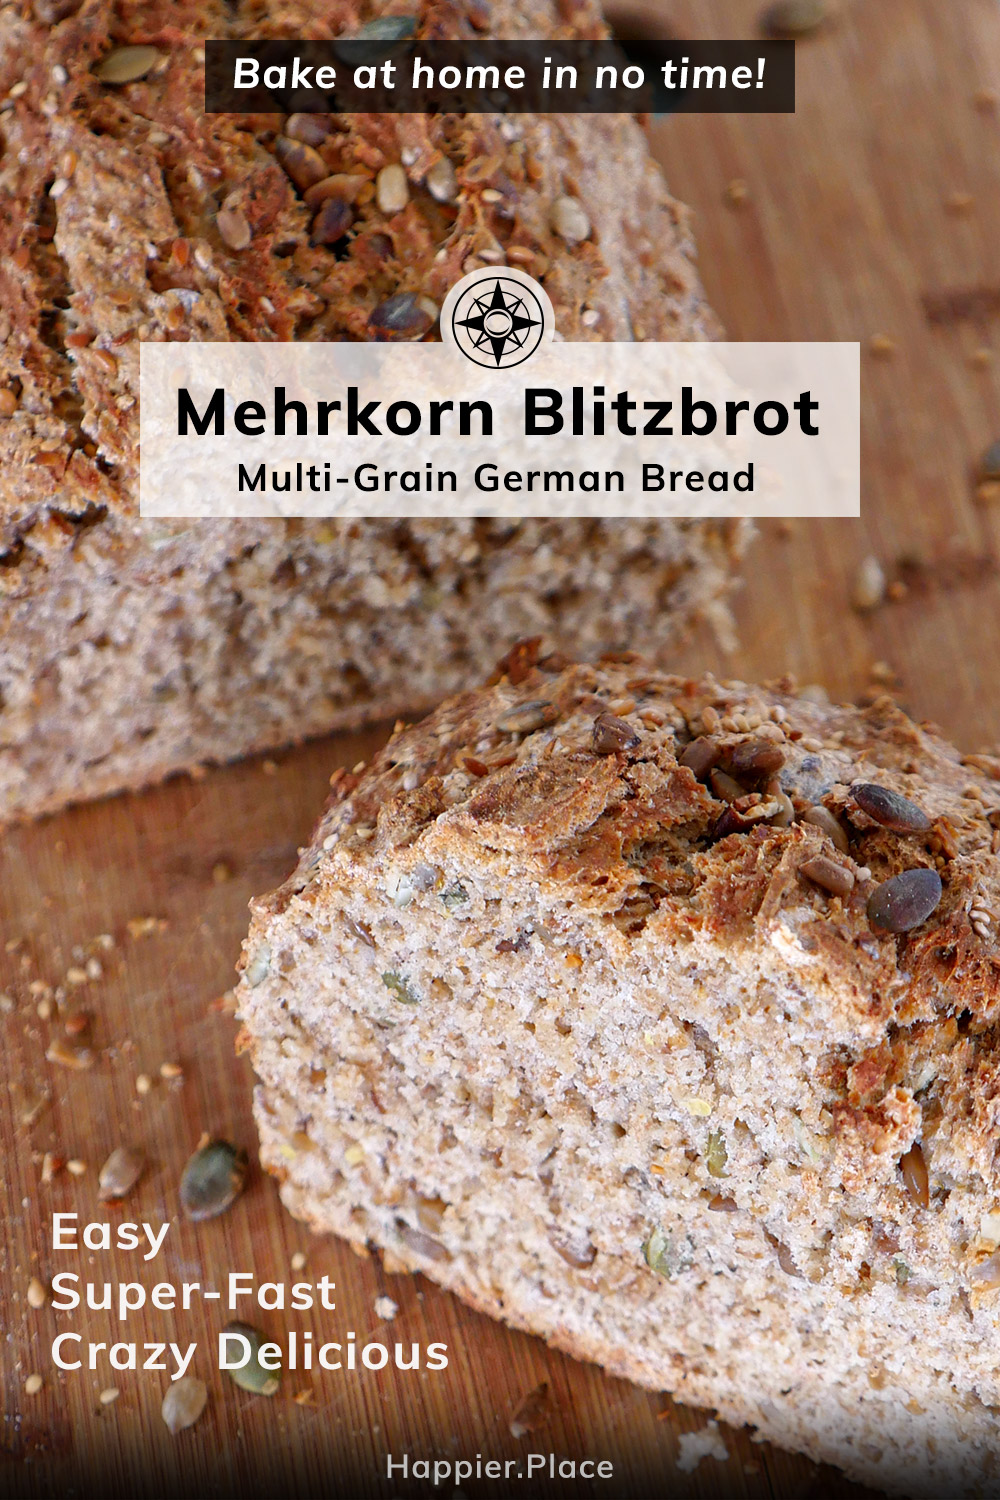 Bake at home Mehrkorn Blitzbrot, easy fast delicious multi-grain, multi-seed, wholewheat German bread from Happier Place